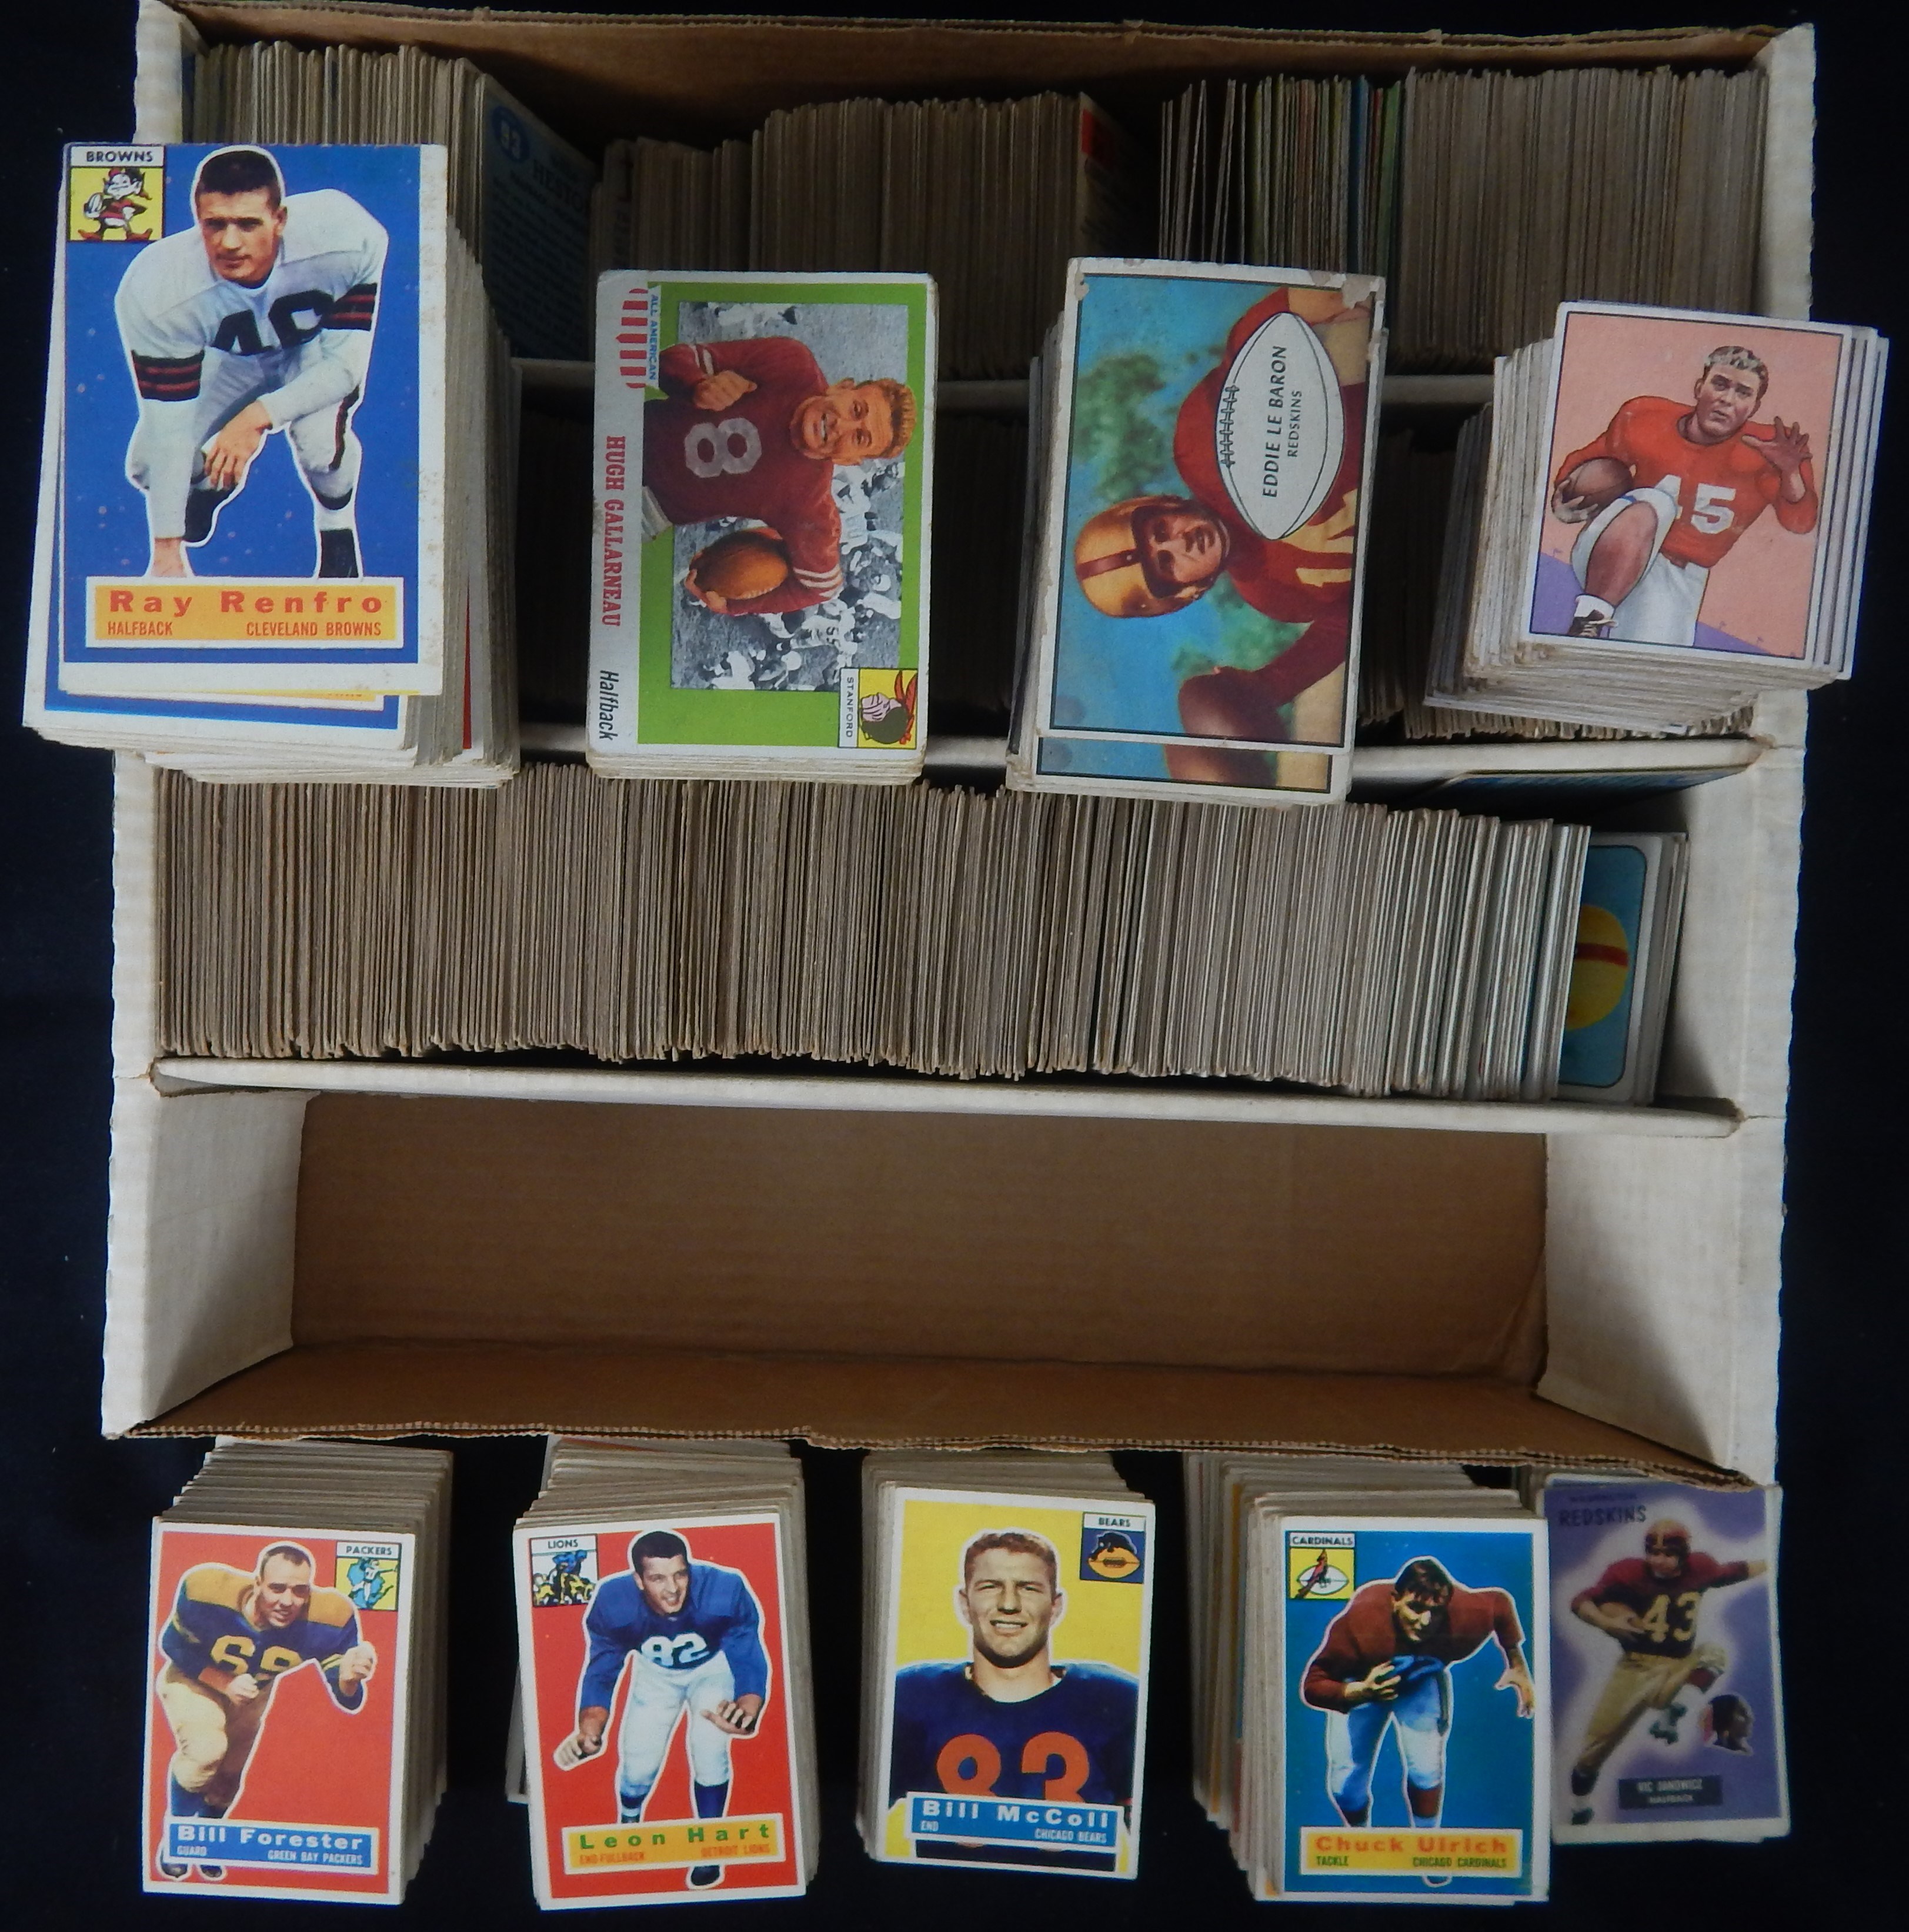 Baseball and Trading Cards - 1950-63 Topps and Bowman Football Card Collection of 2,300 Cards